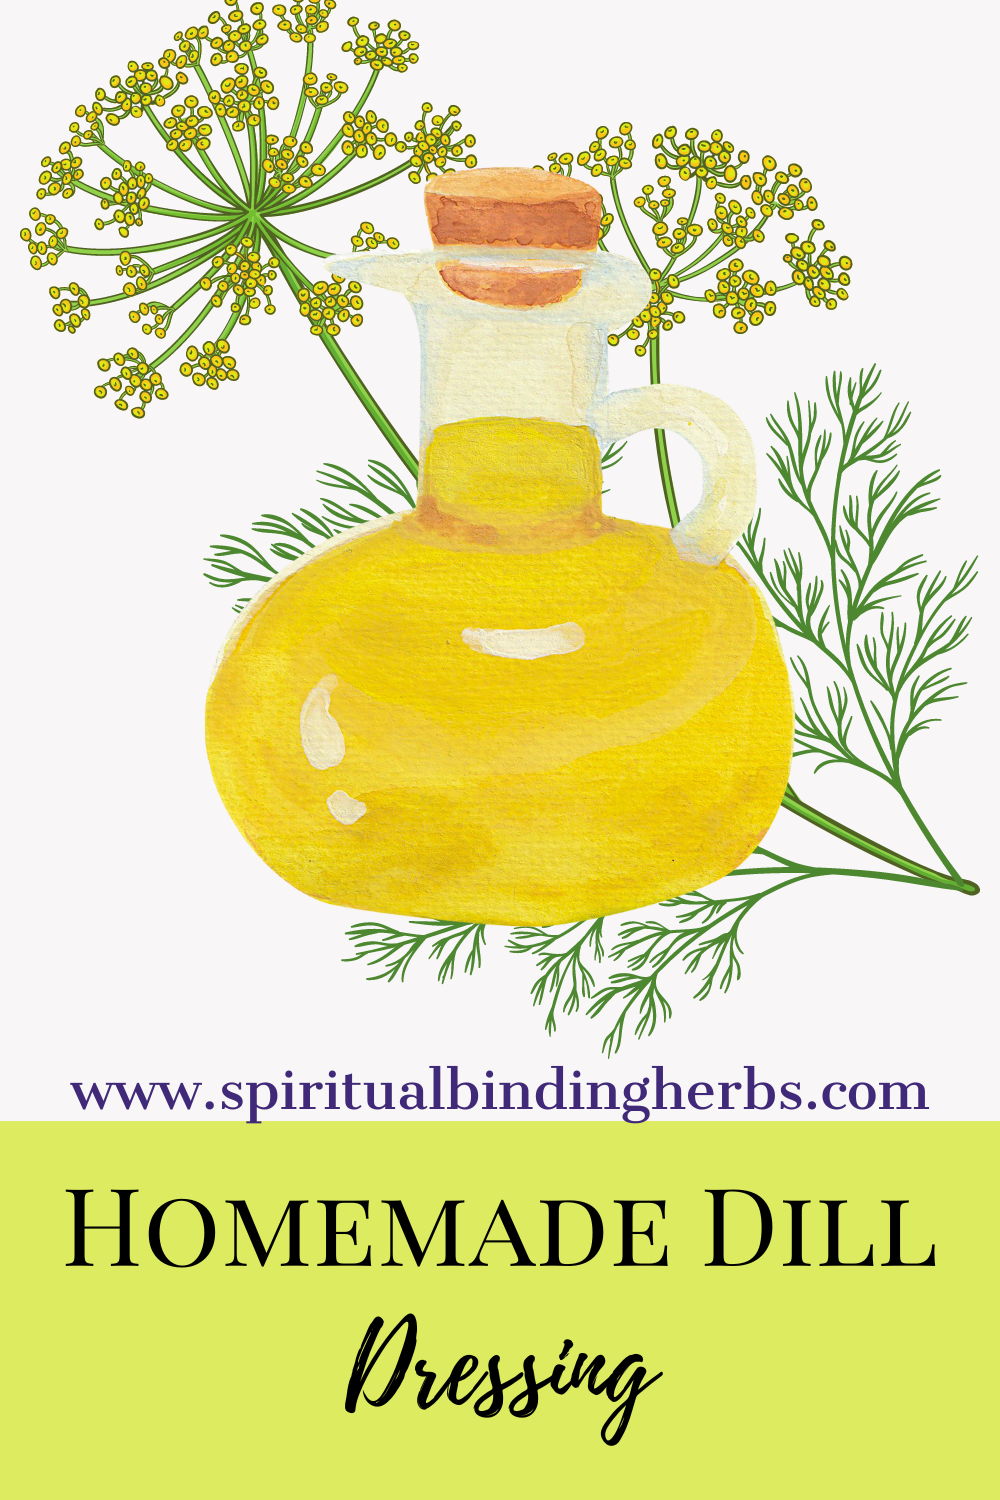 How To Use Dill From The Garden - Homemade Dill Dressing